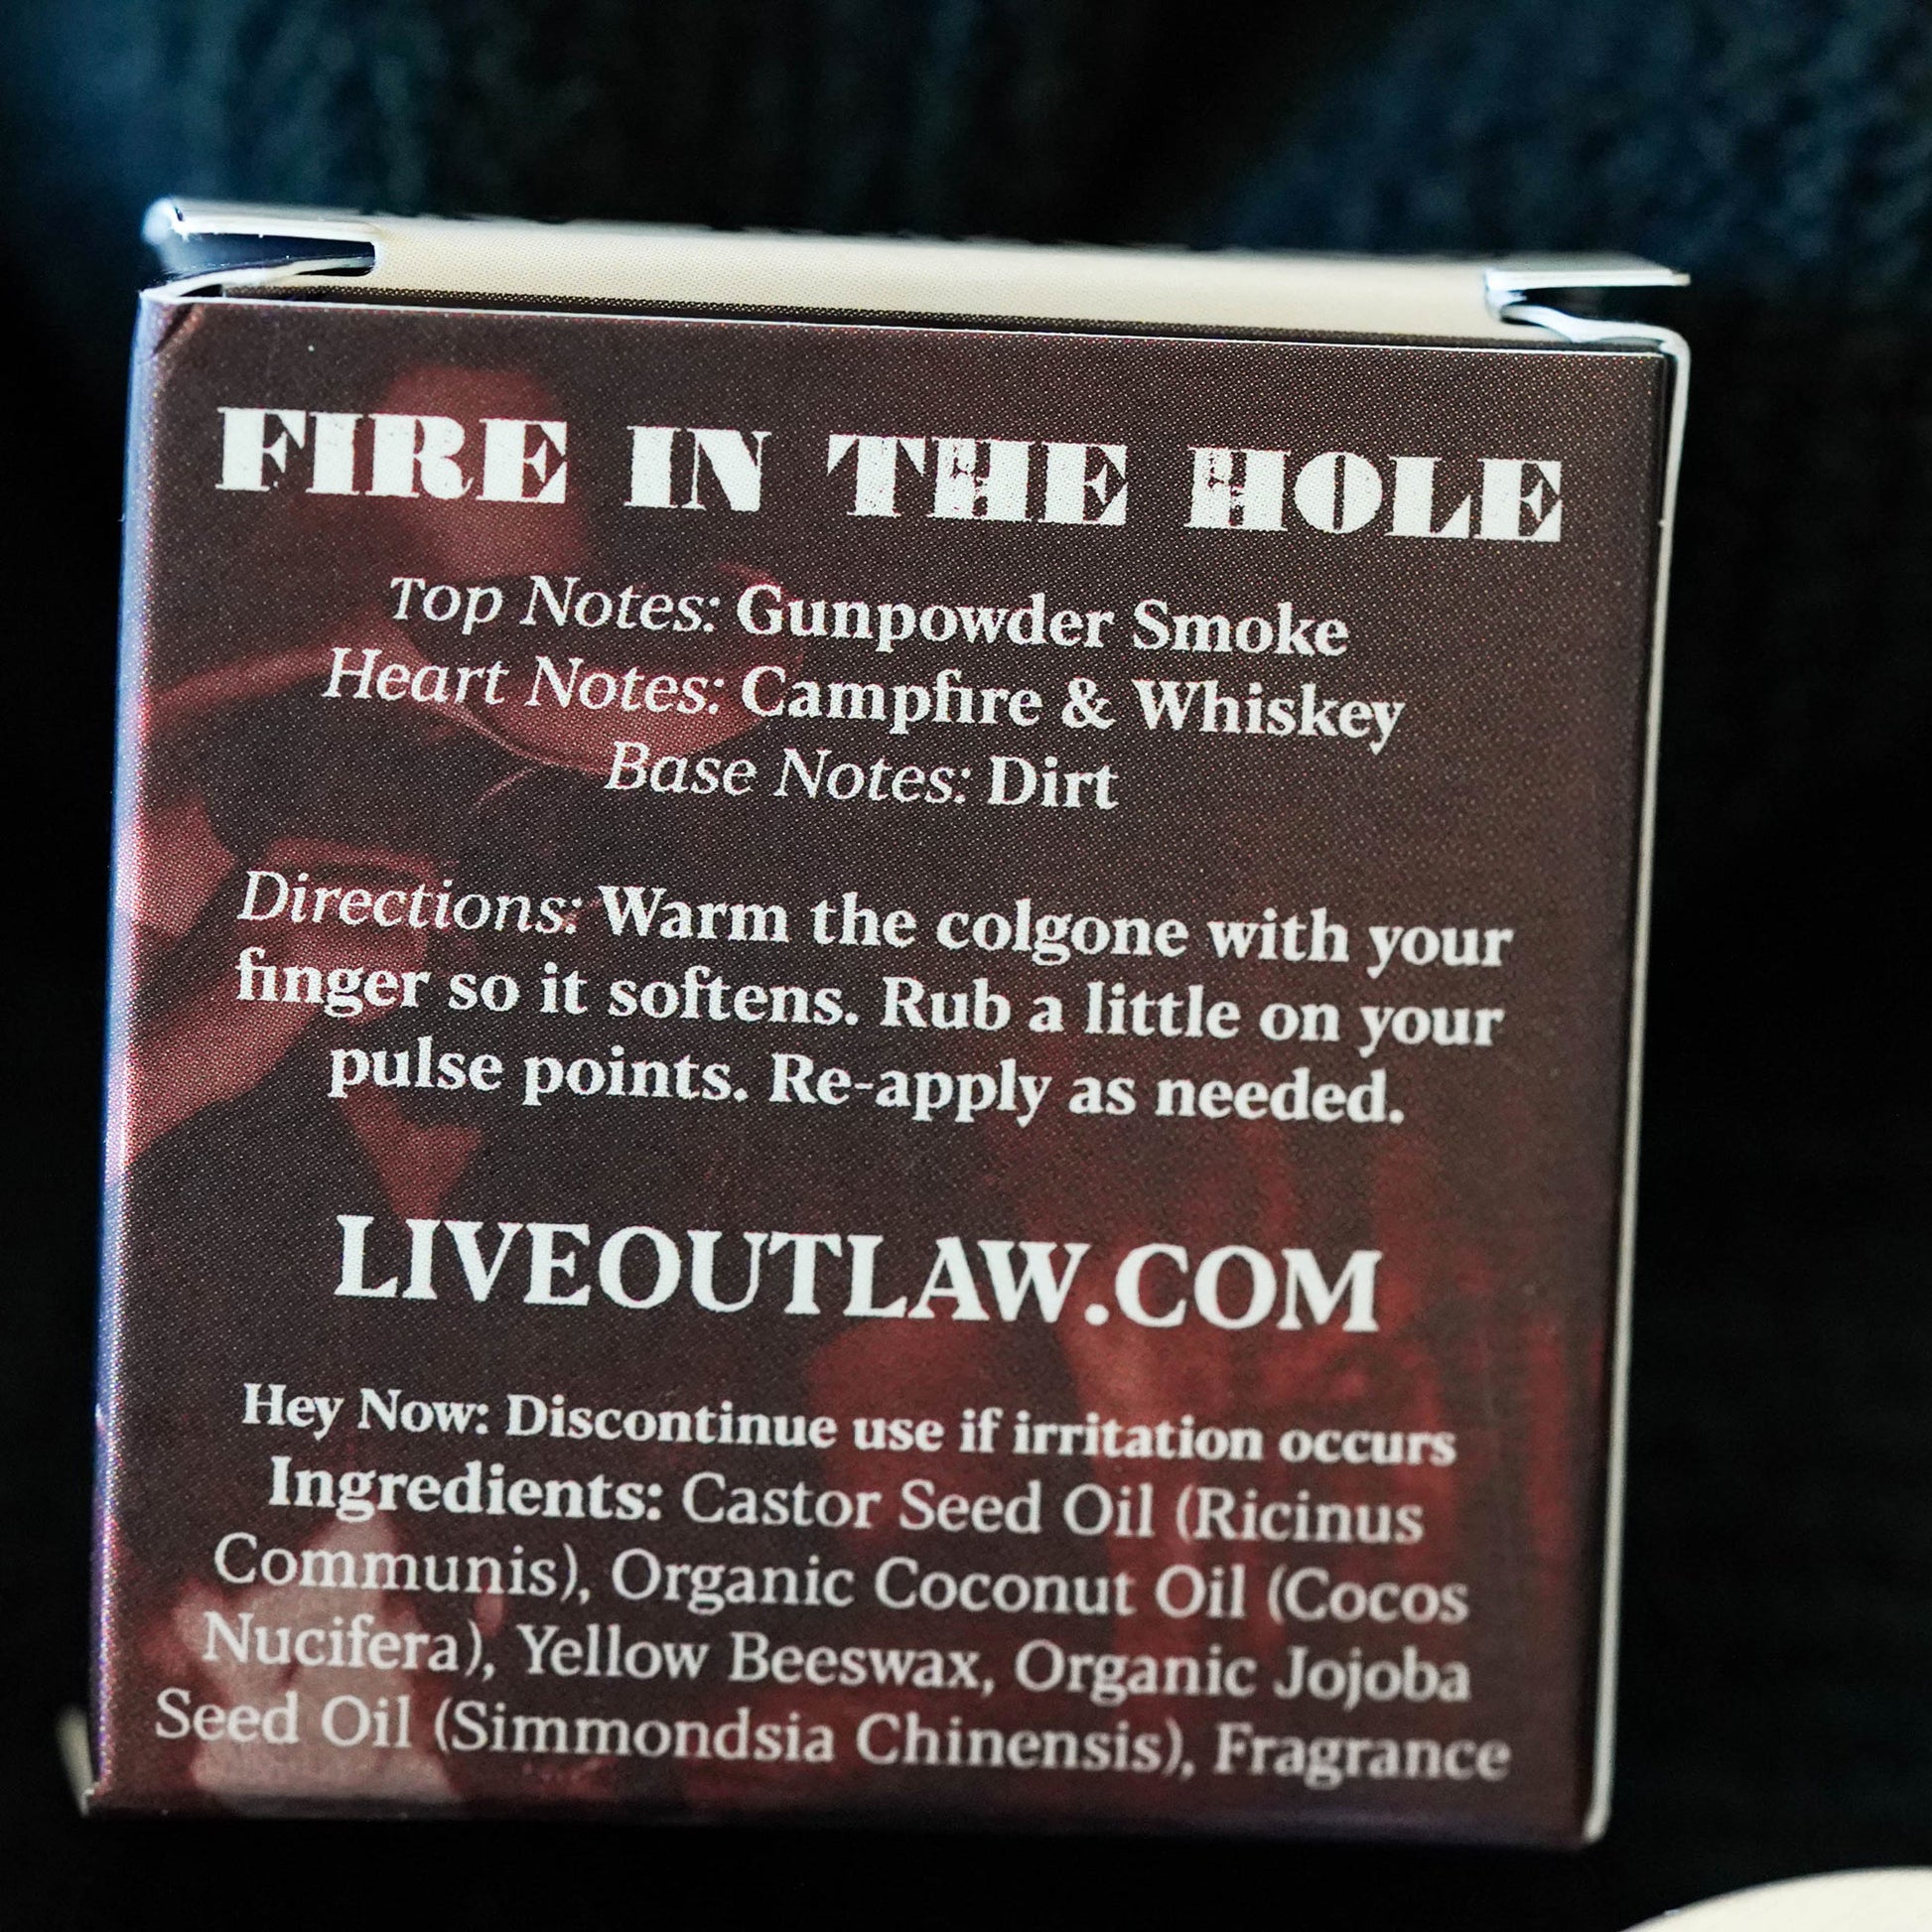 Campfire Gunpowder Whiskey Solid Cologne for Men and Women, by Outlaw